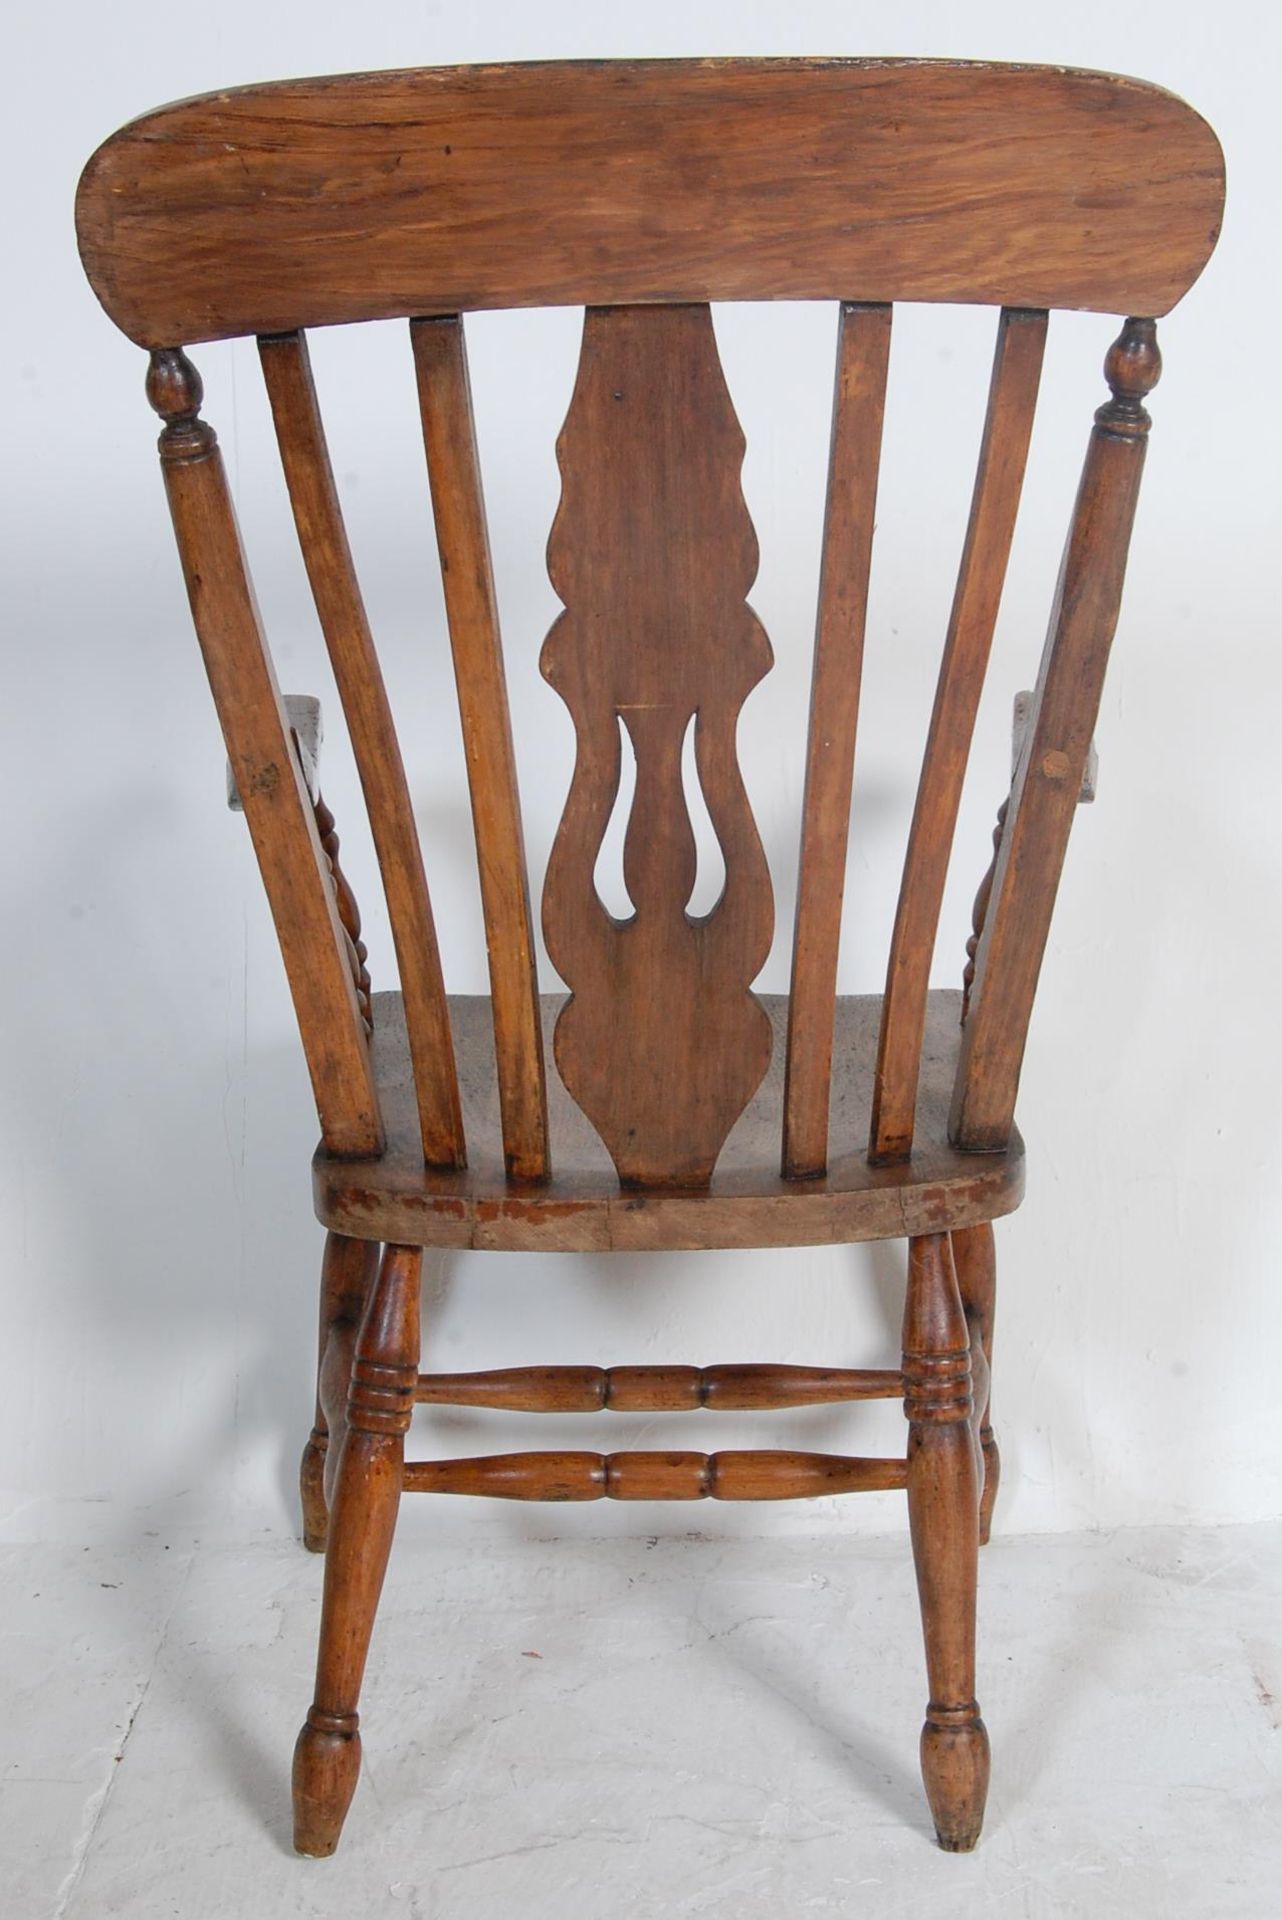 19TH CENTURY VICTORIAN BEECH AND ELM WINDSOR CHAIR - Image 7 of 7